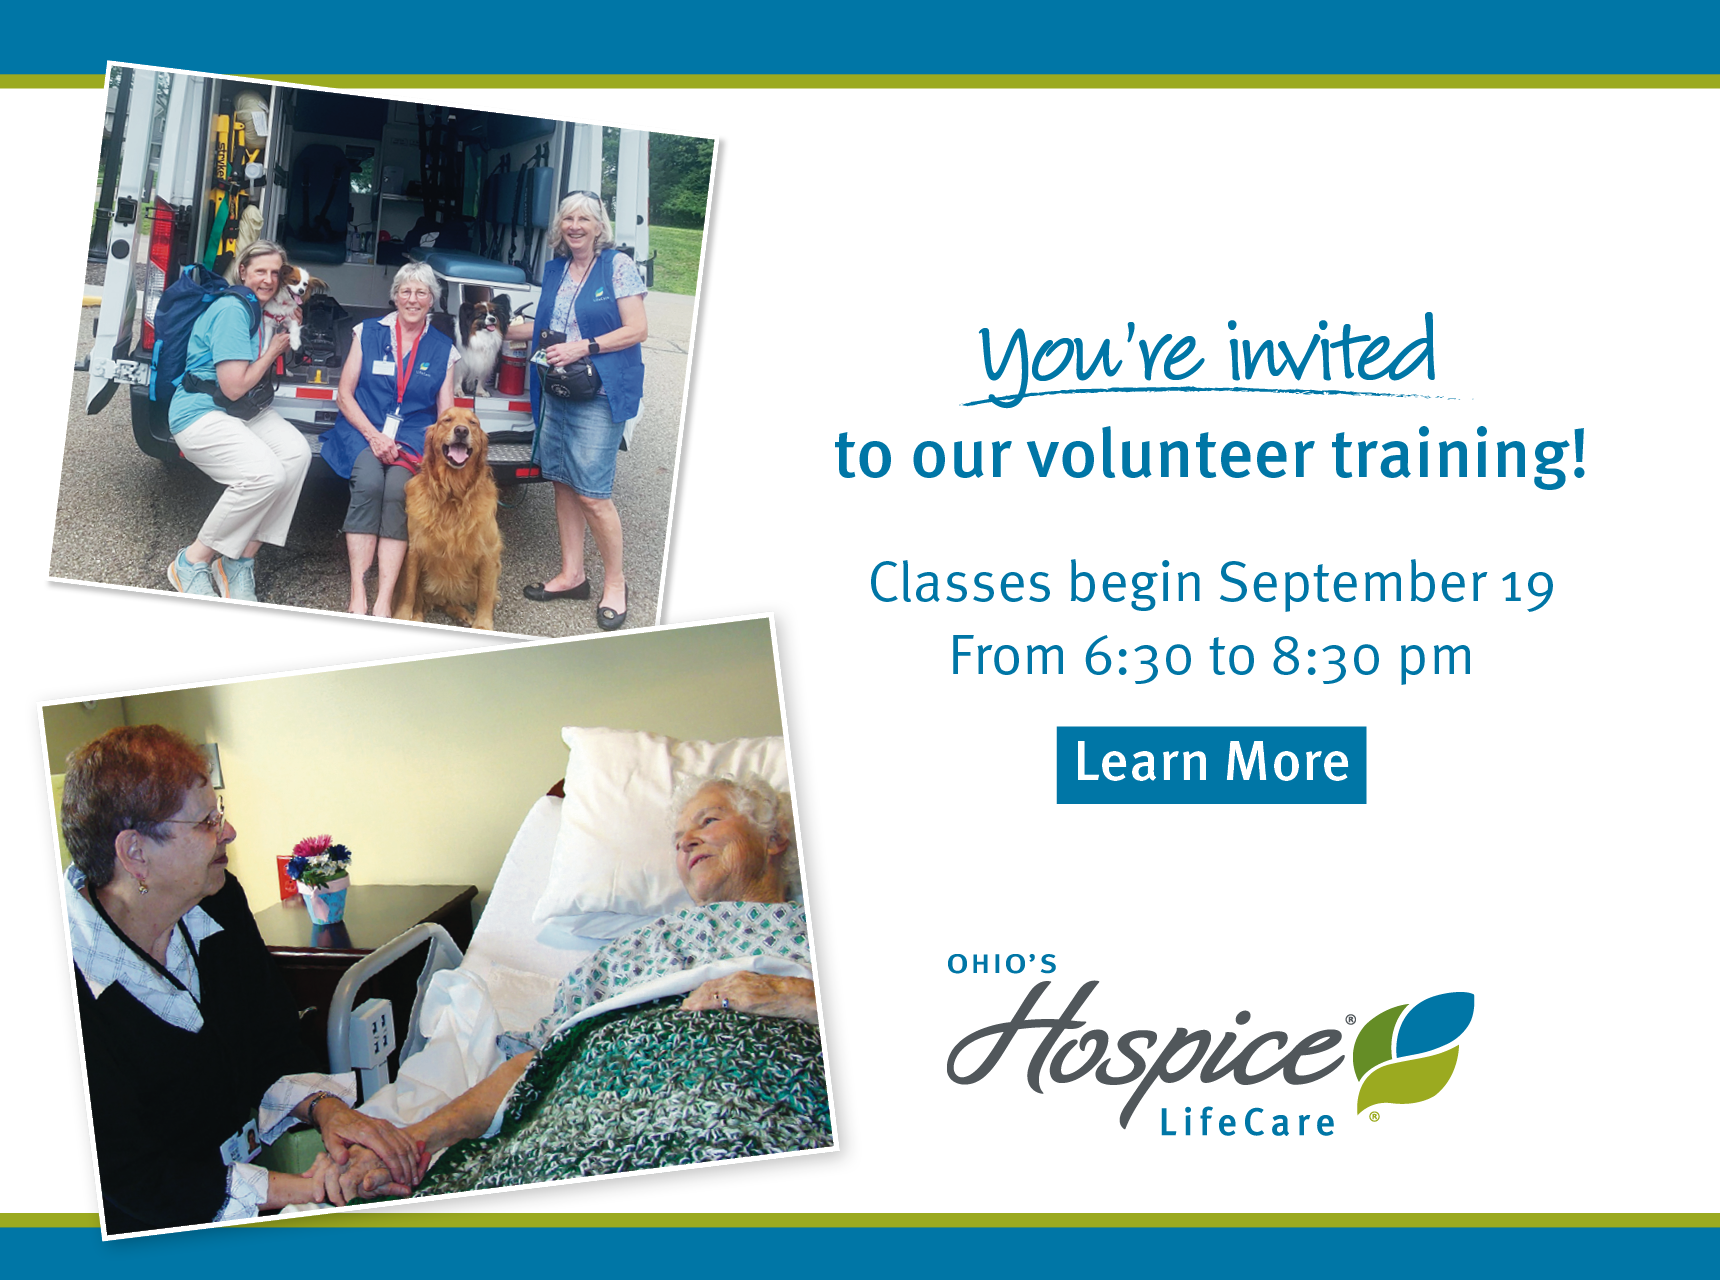 You're invited to our volunteer training! Classes begin September 19